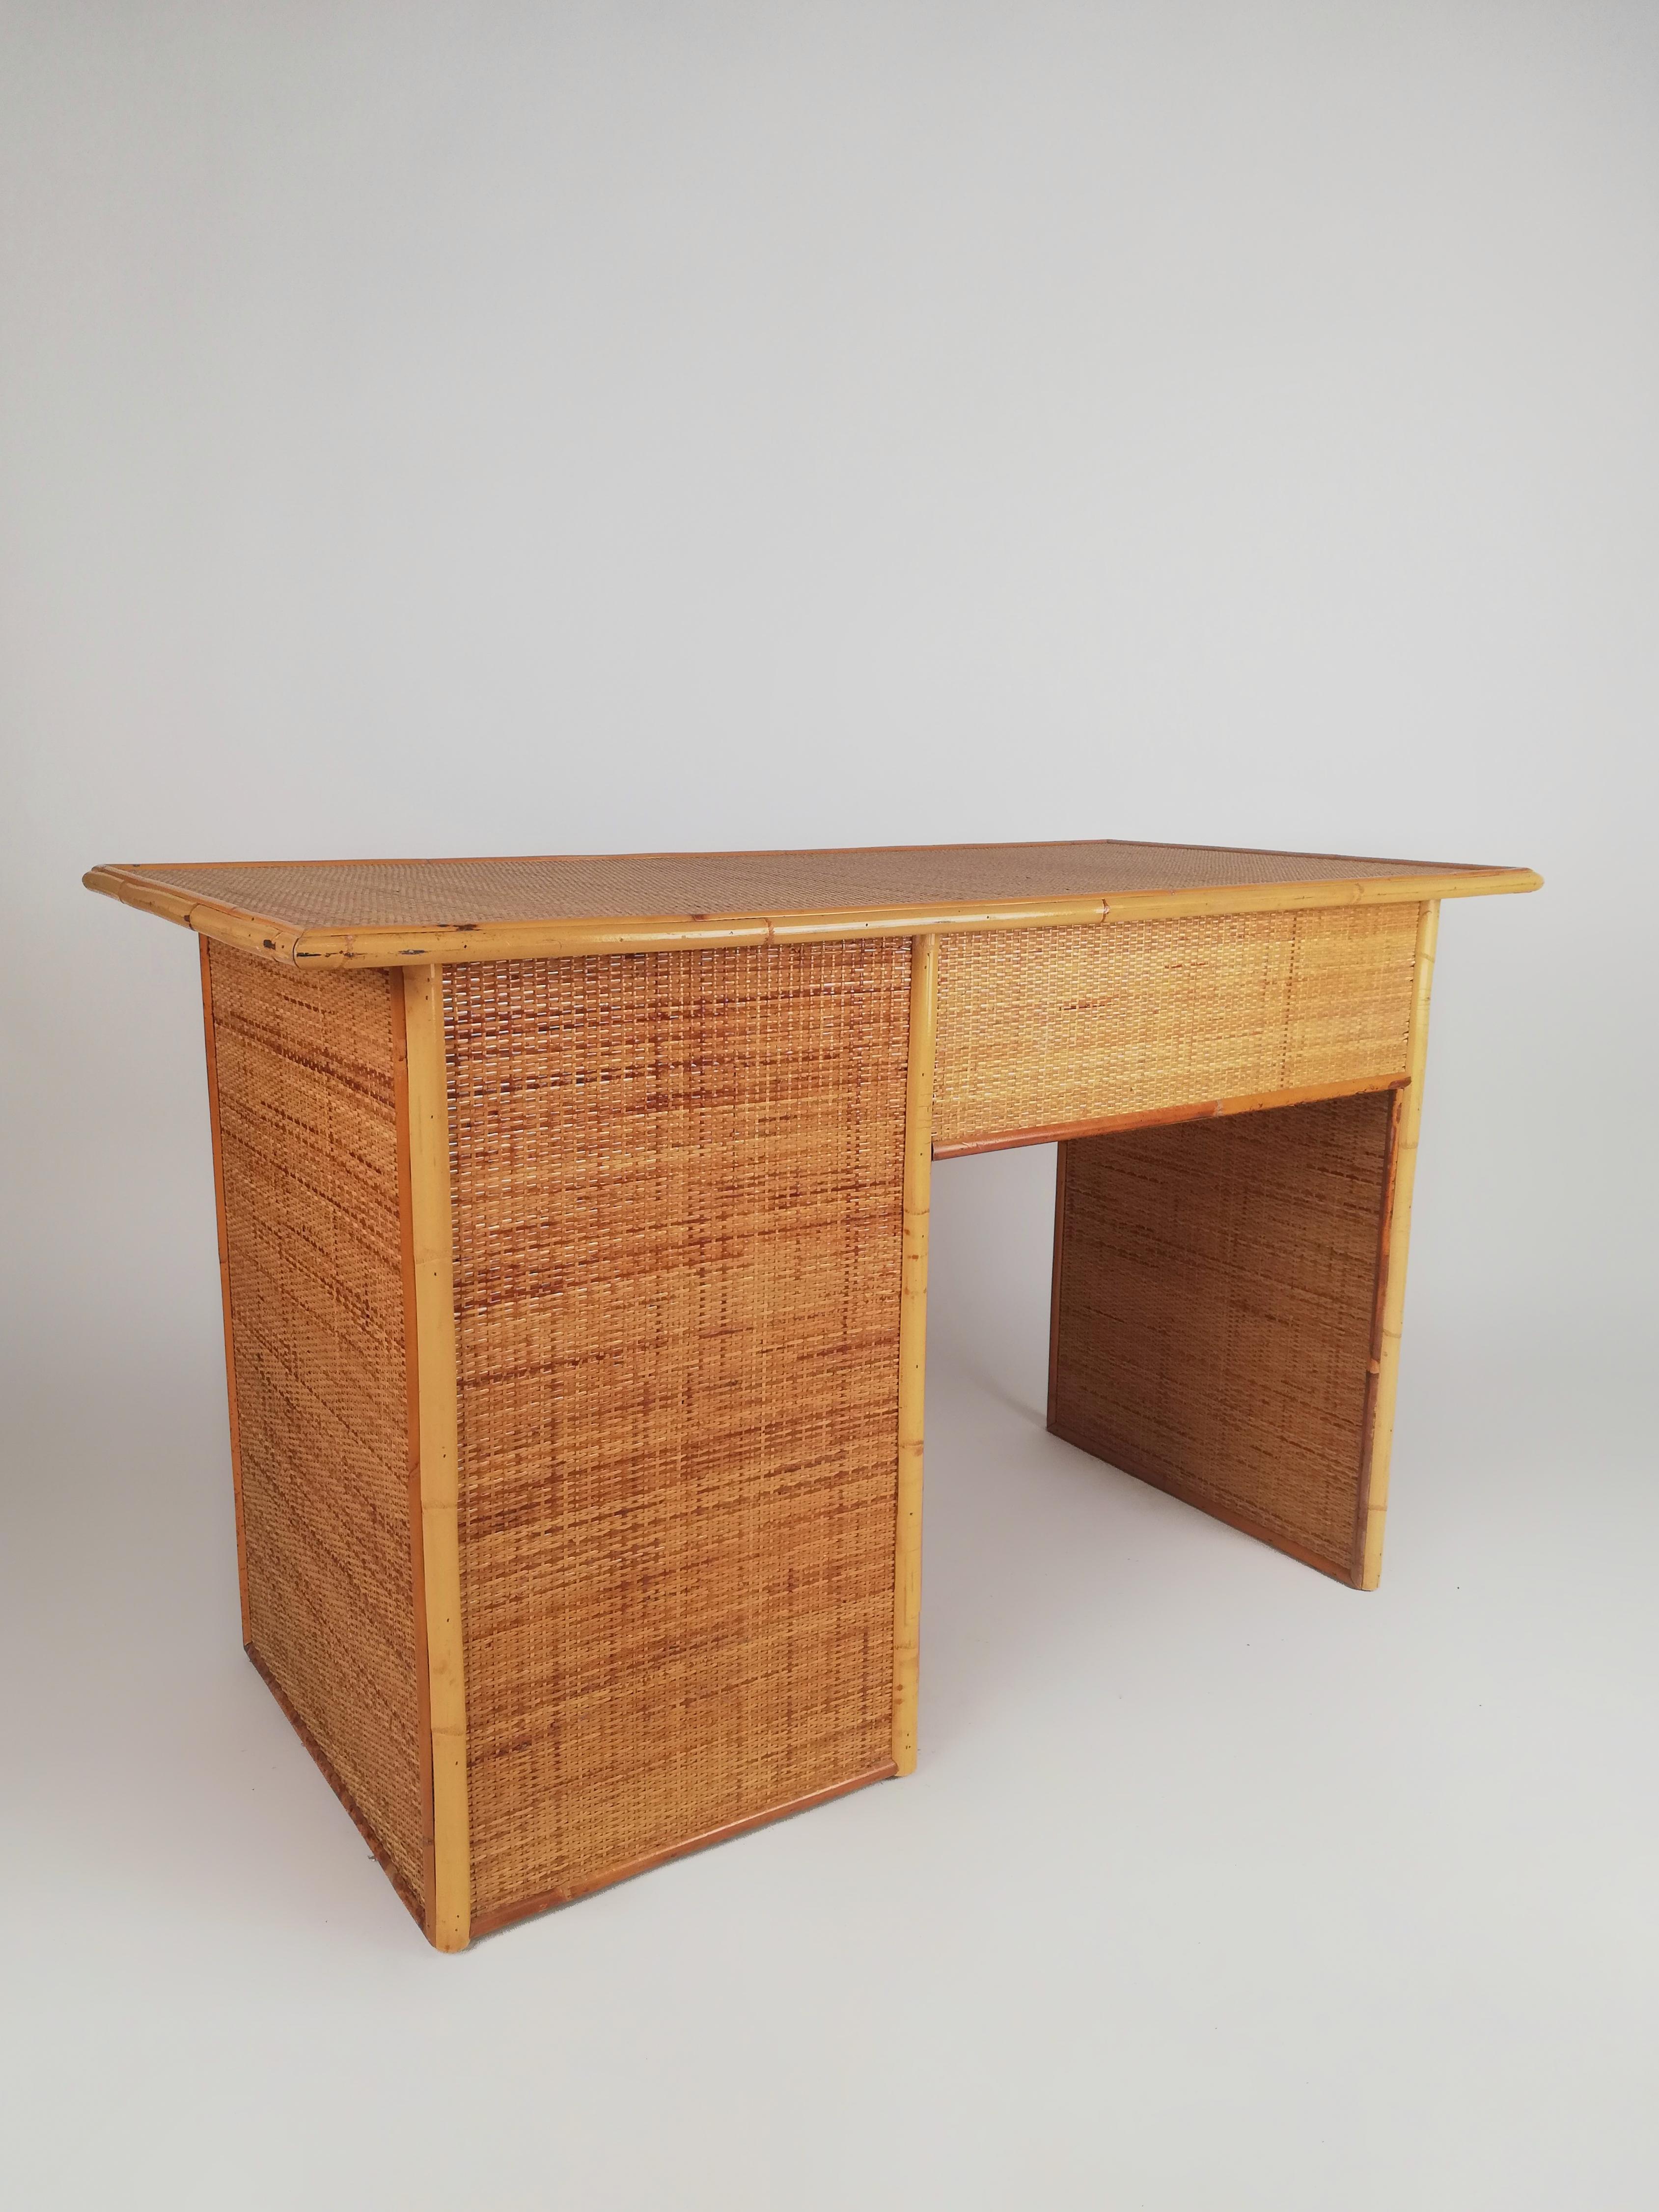 Vintage Italian Writing Desk with Drawers in Bamboo, Rattan and Plywood, 1970s For Sale 8